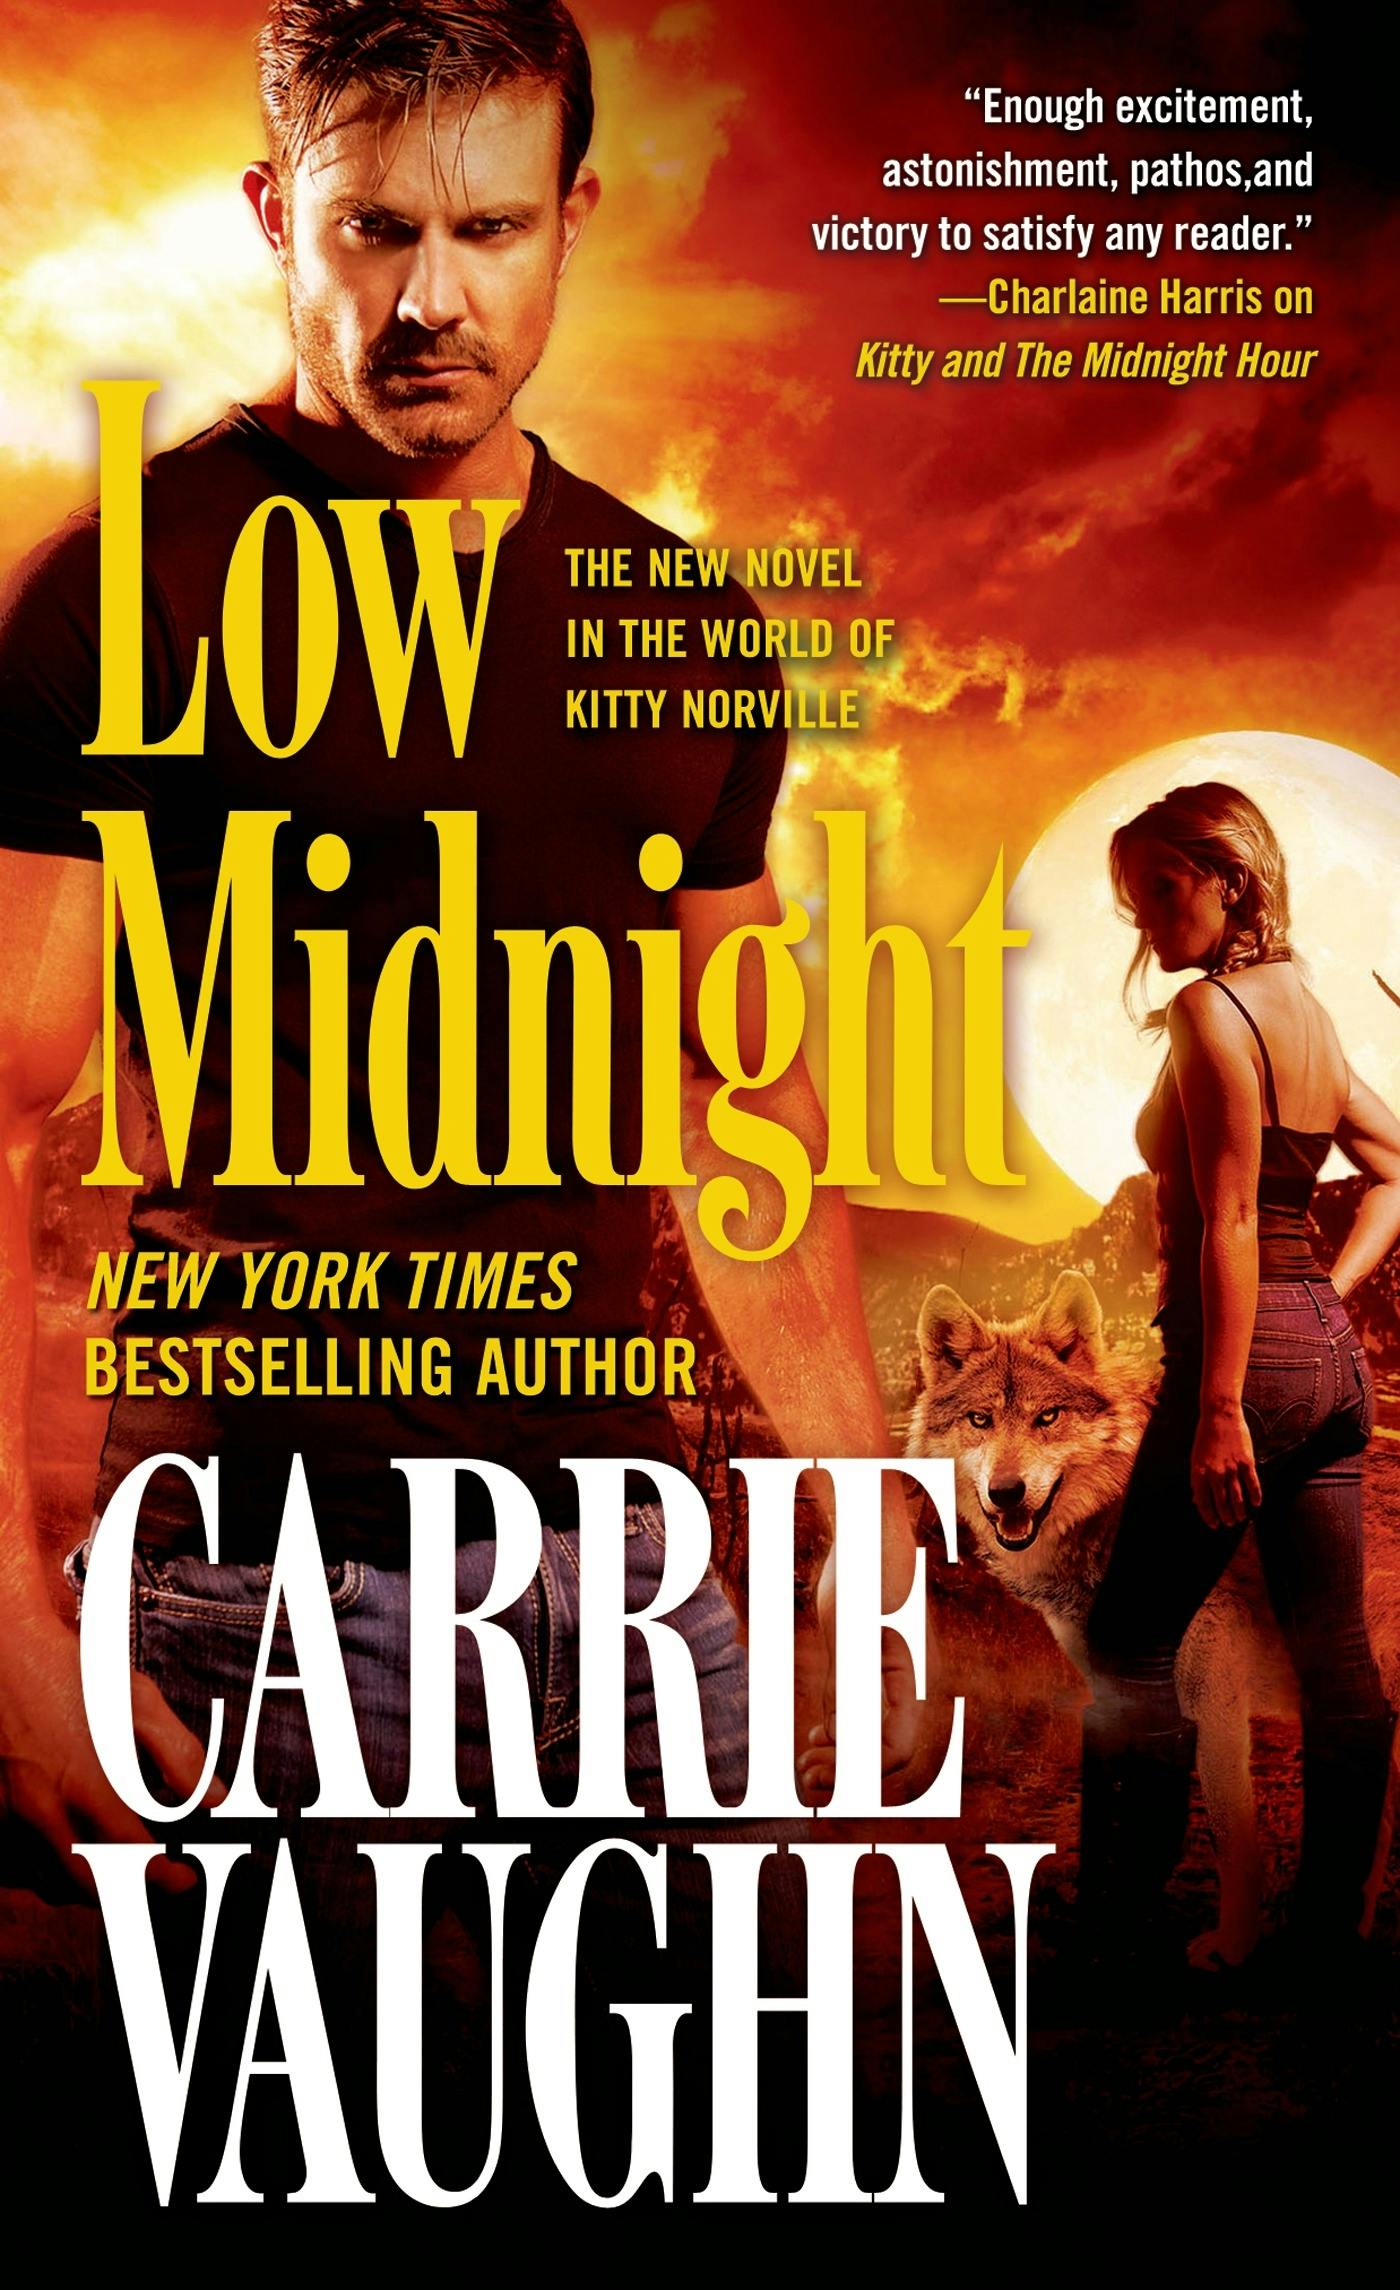 Cover for the book titled as: Low Midnight